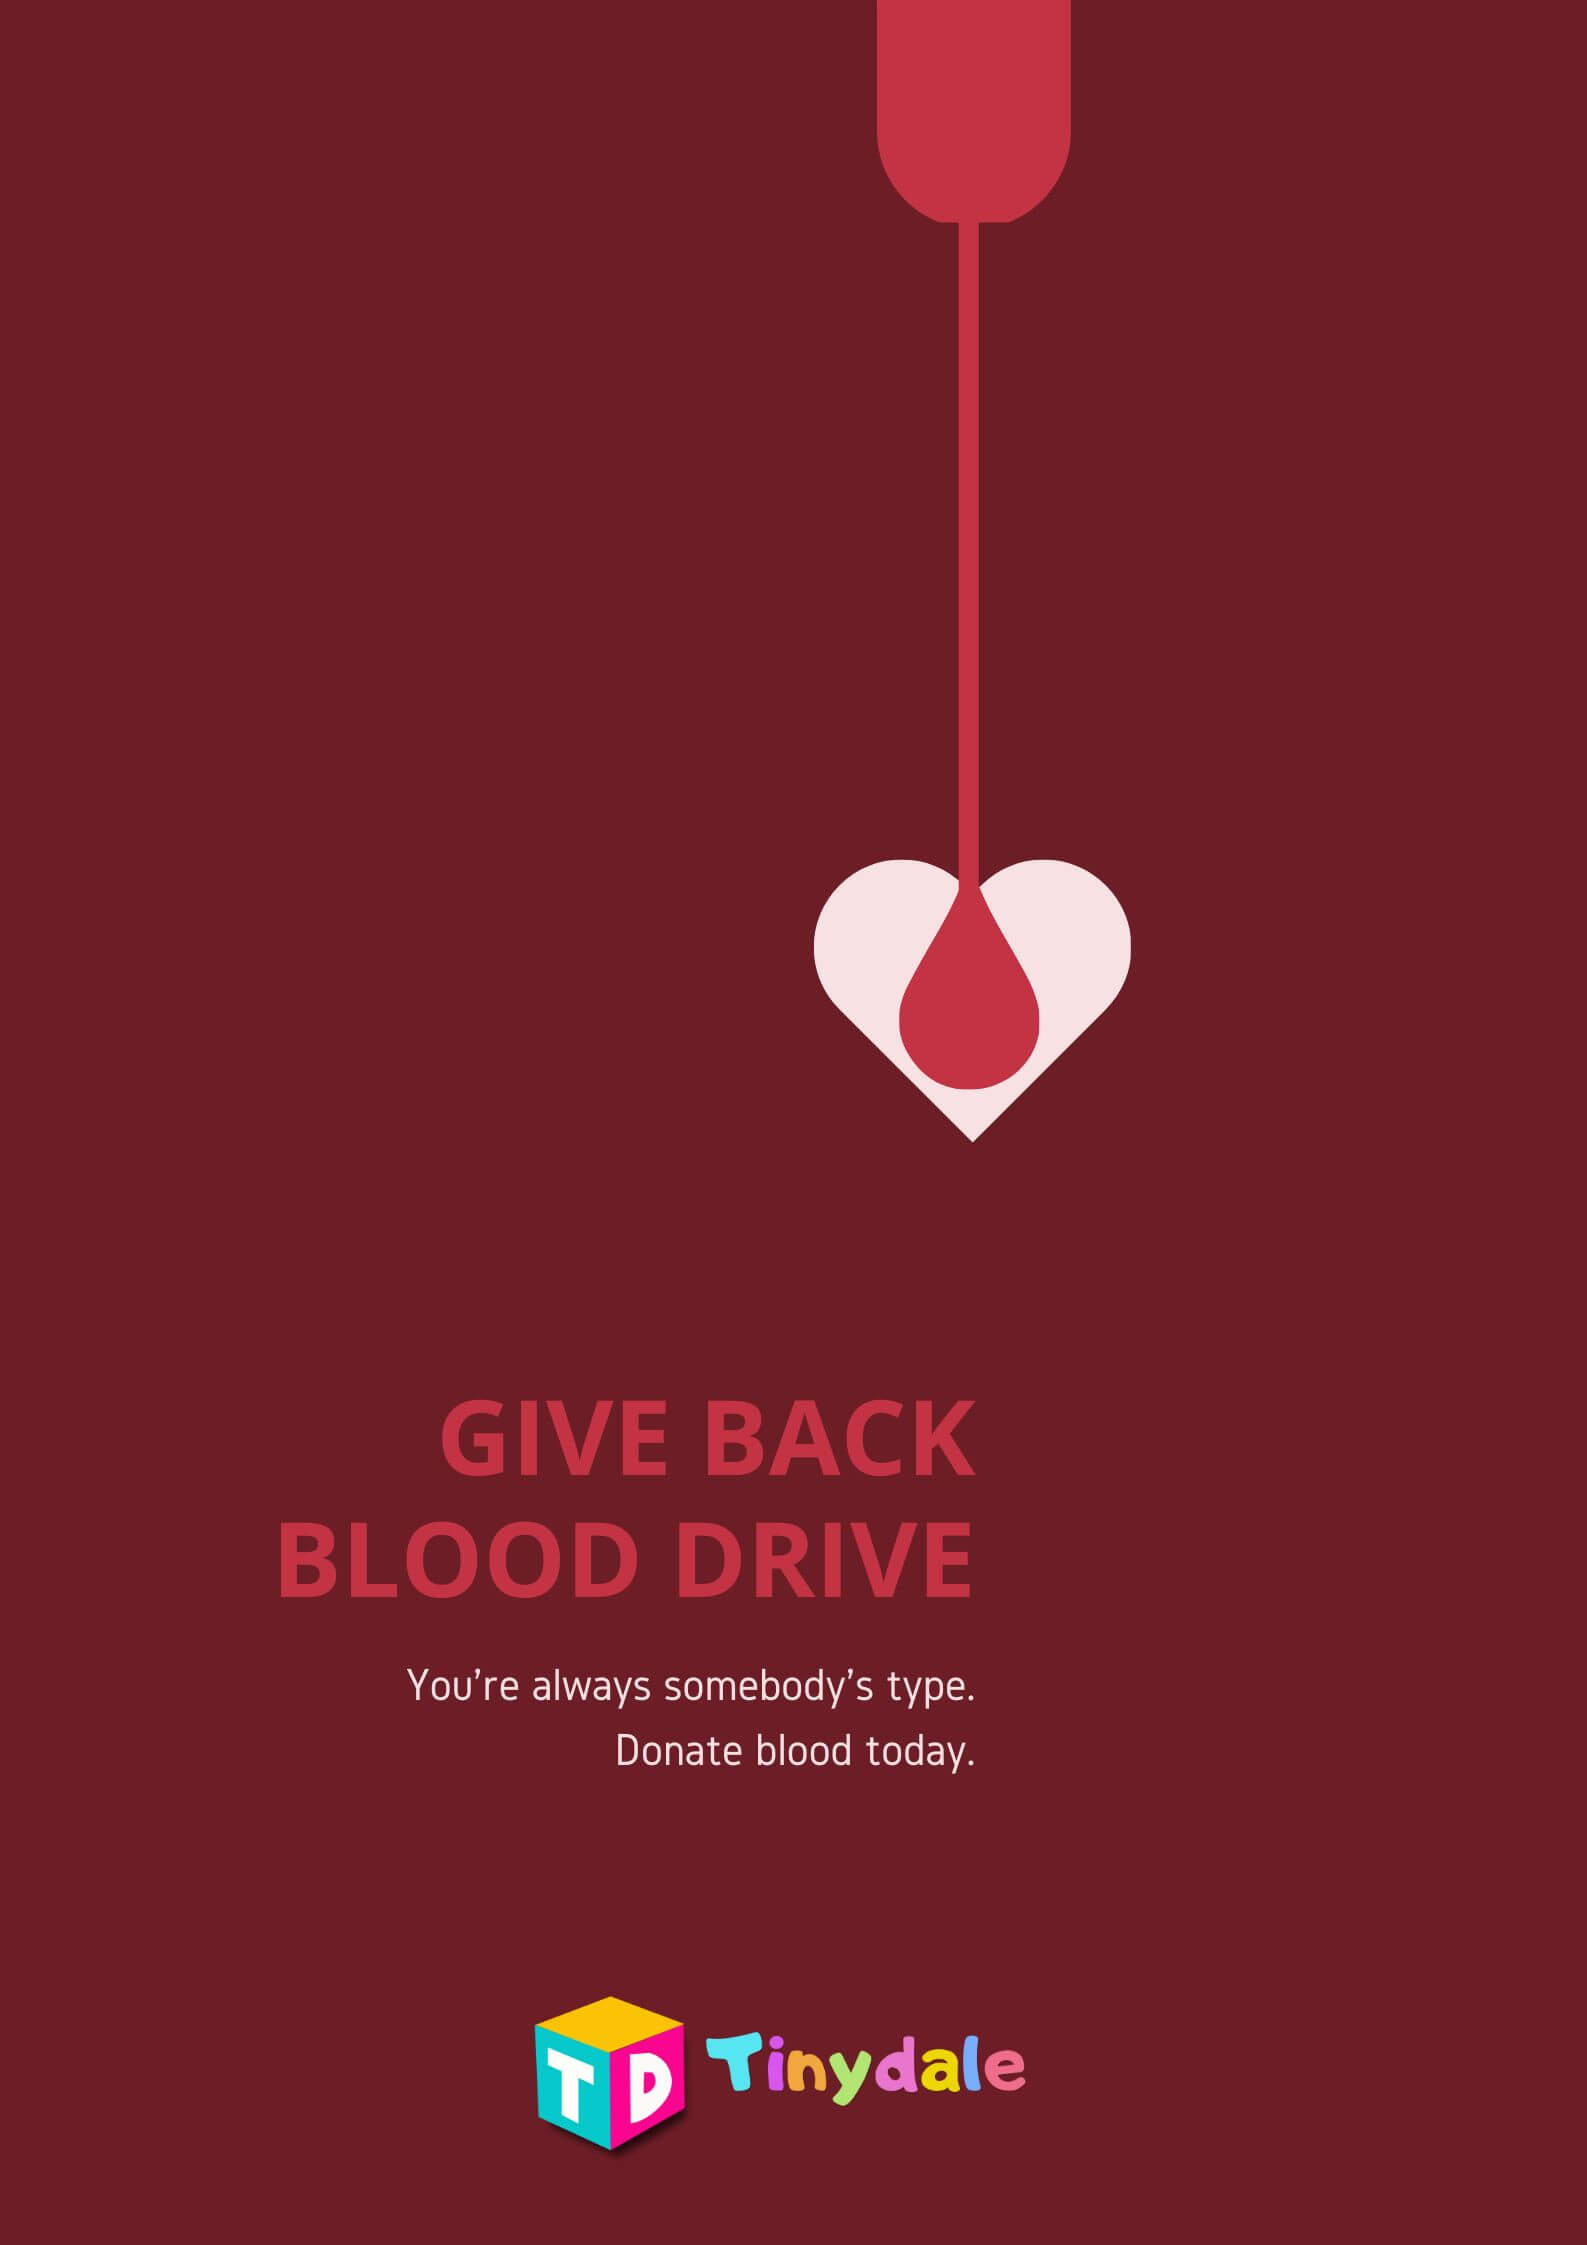 Blood Donation Day poster